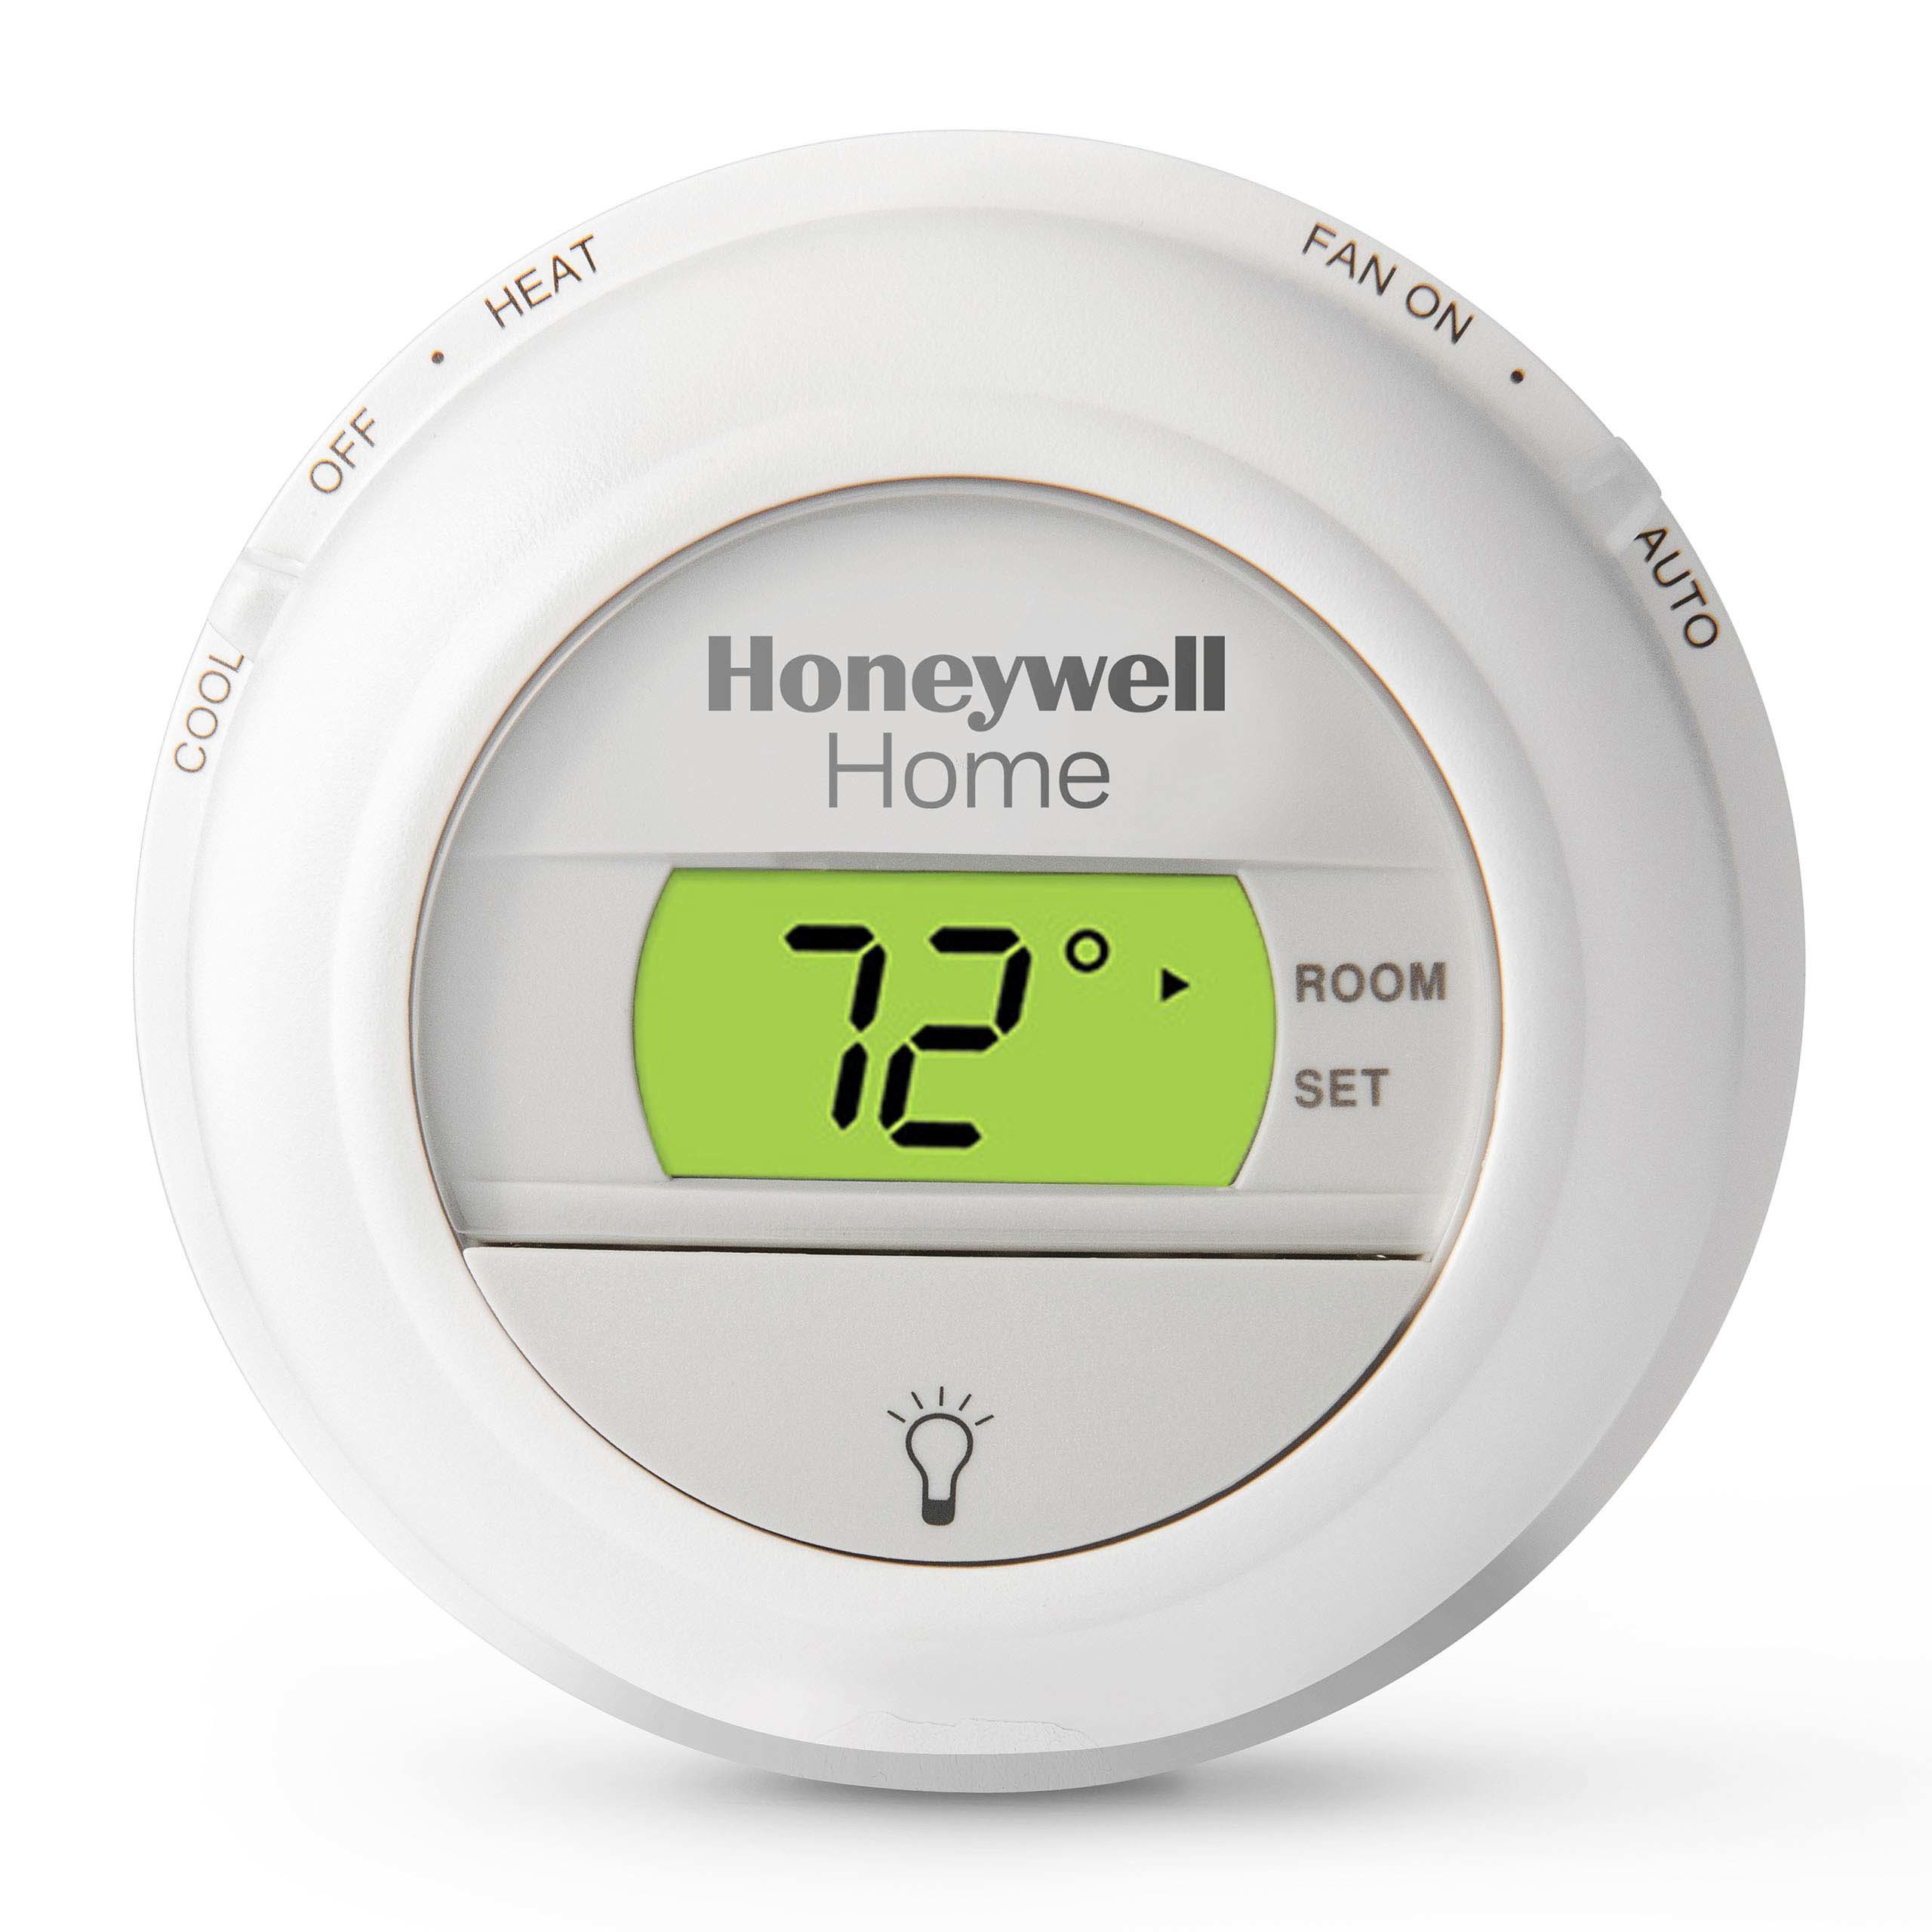 David's HomeTown Heating & Air Conditioning, Programmable Thermostats